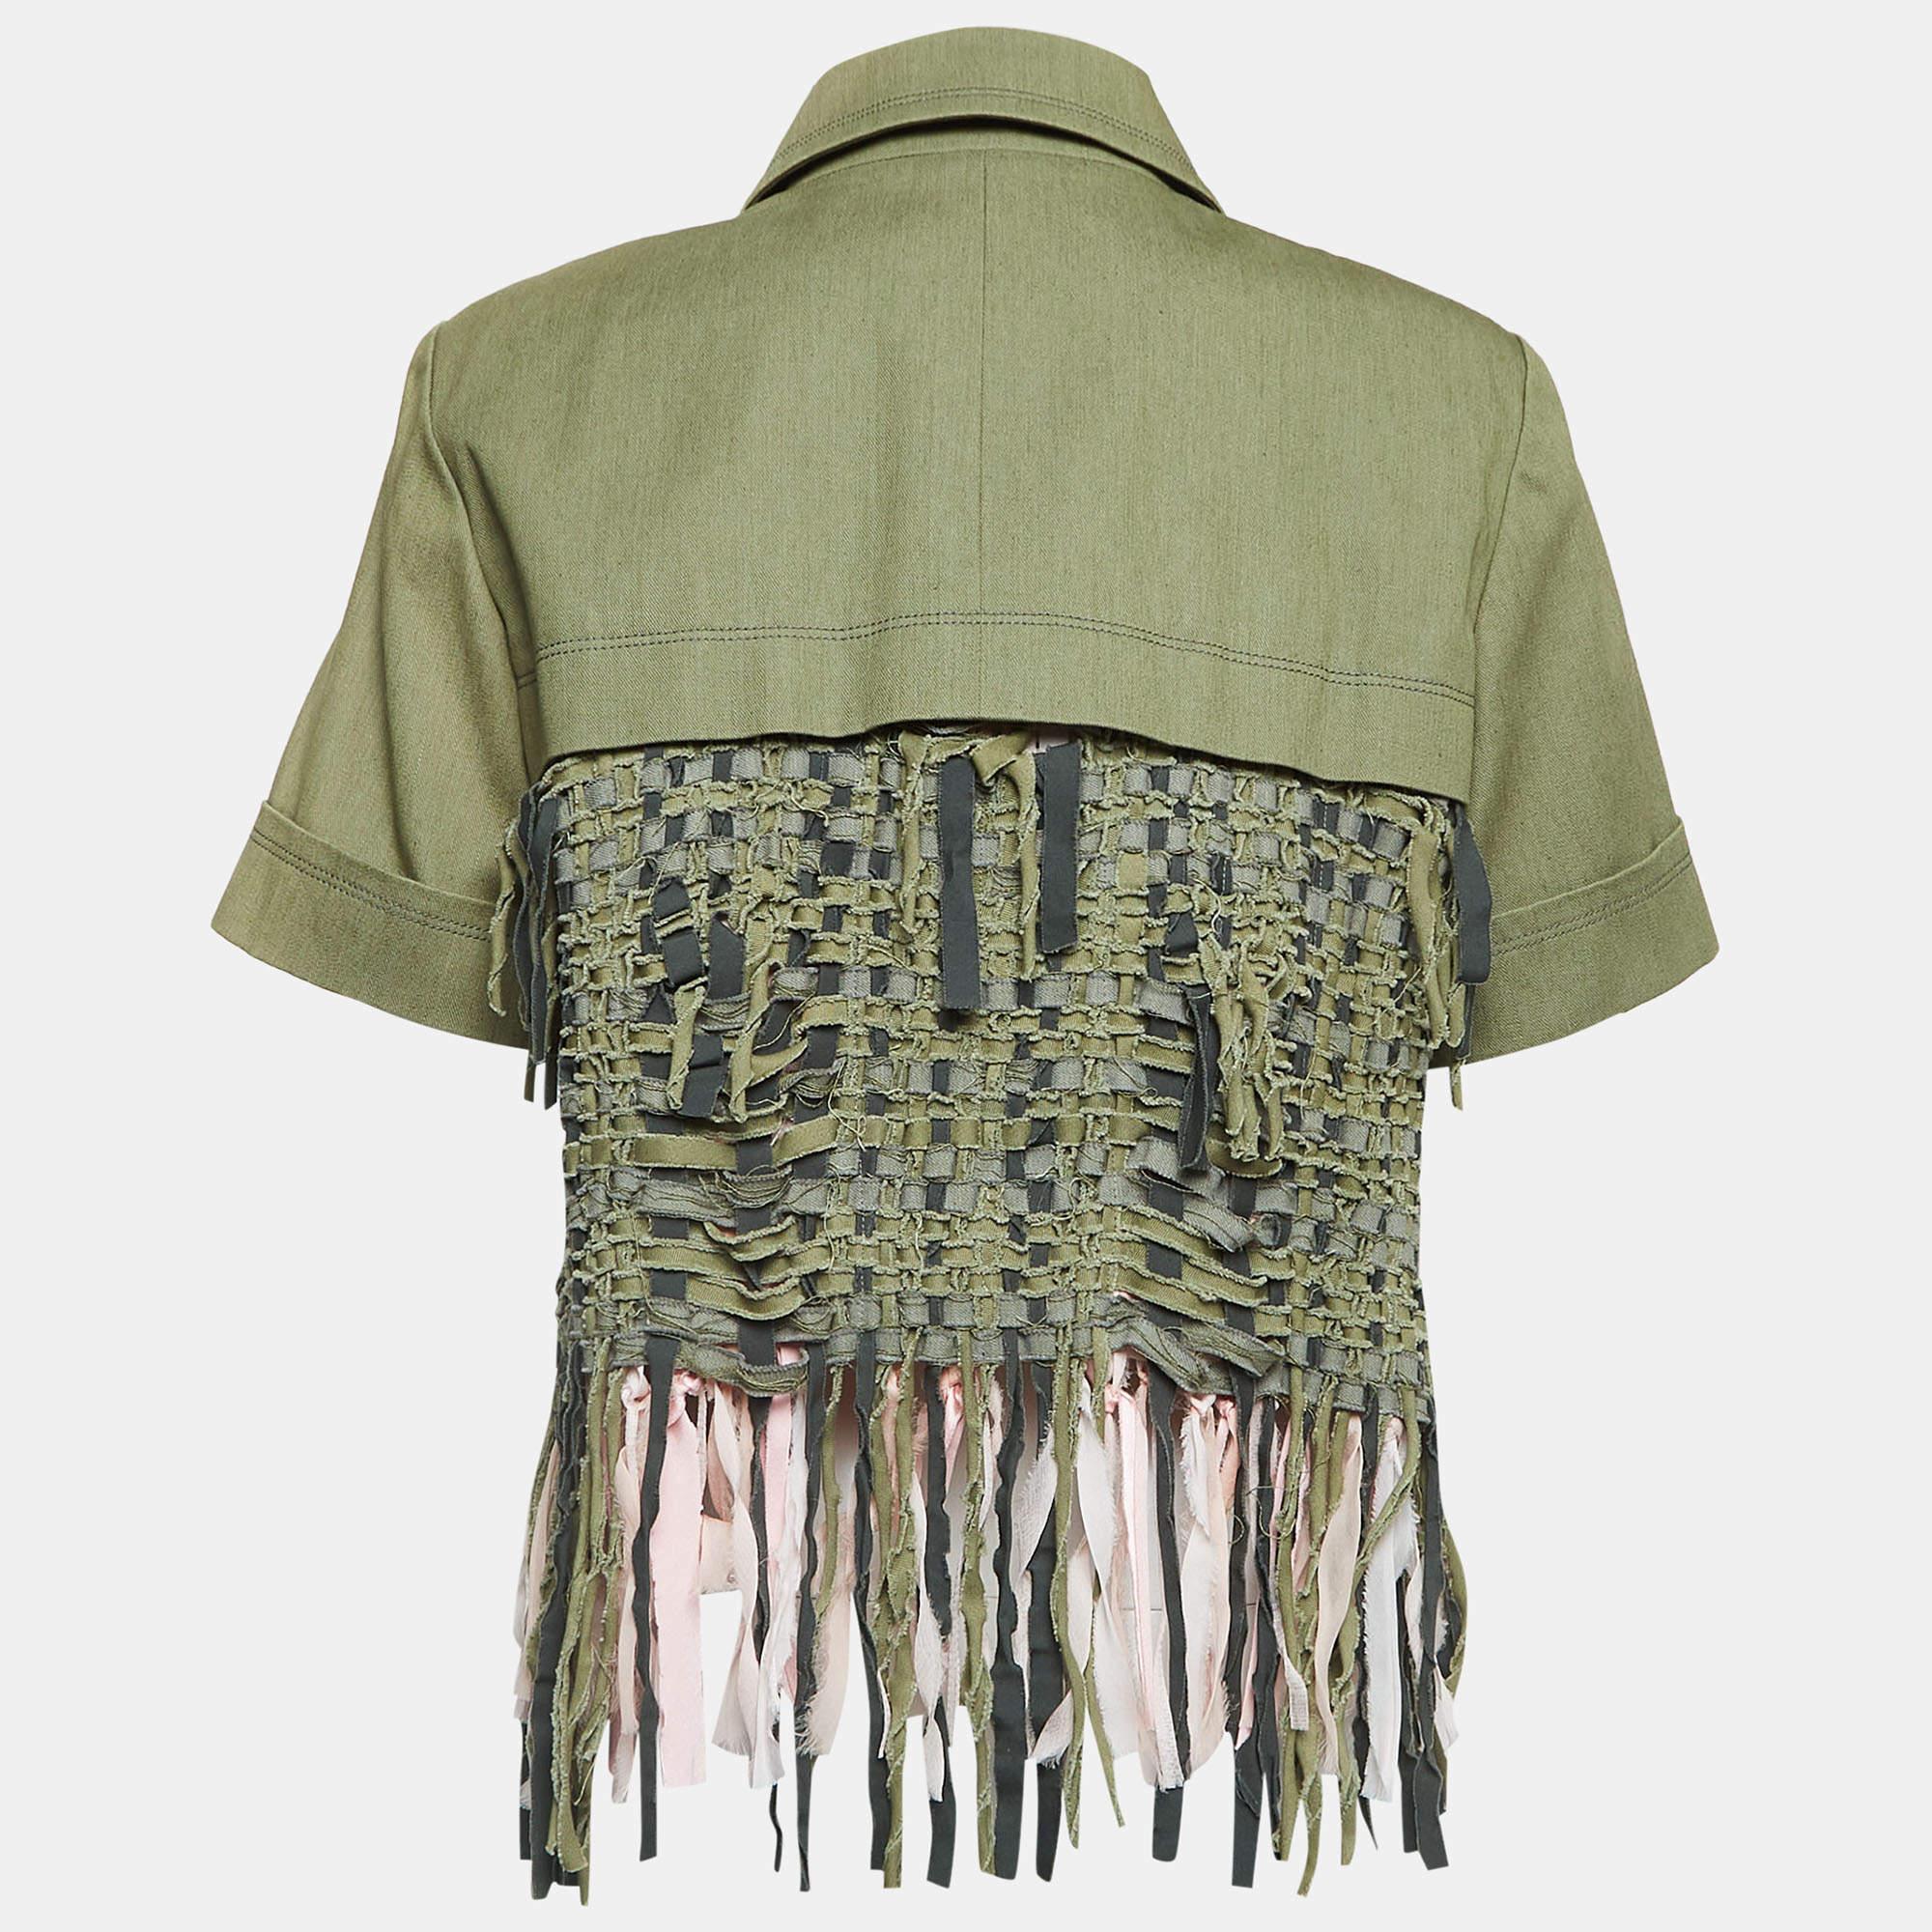 The Chanel jacket exudes sophistication with its luxurious green gabardine fabric. Adorned with intricate fringe detailing, it offers a unique blend of elegance and contemporary style, perfect for making a statement with timeless charm and